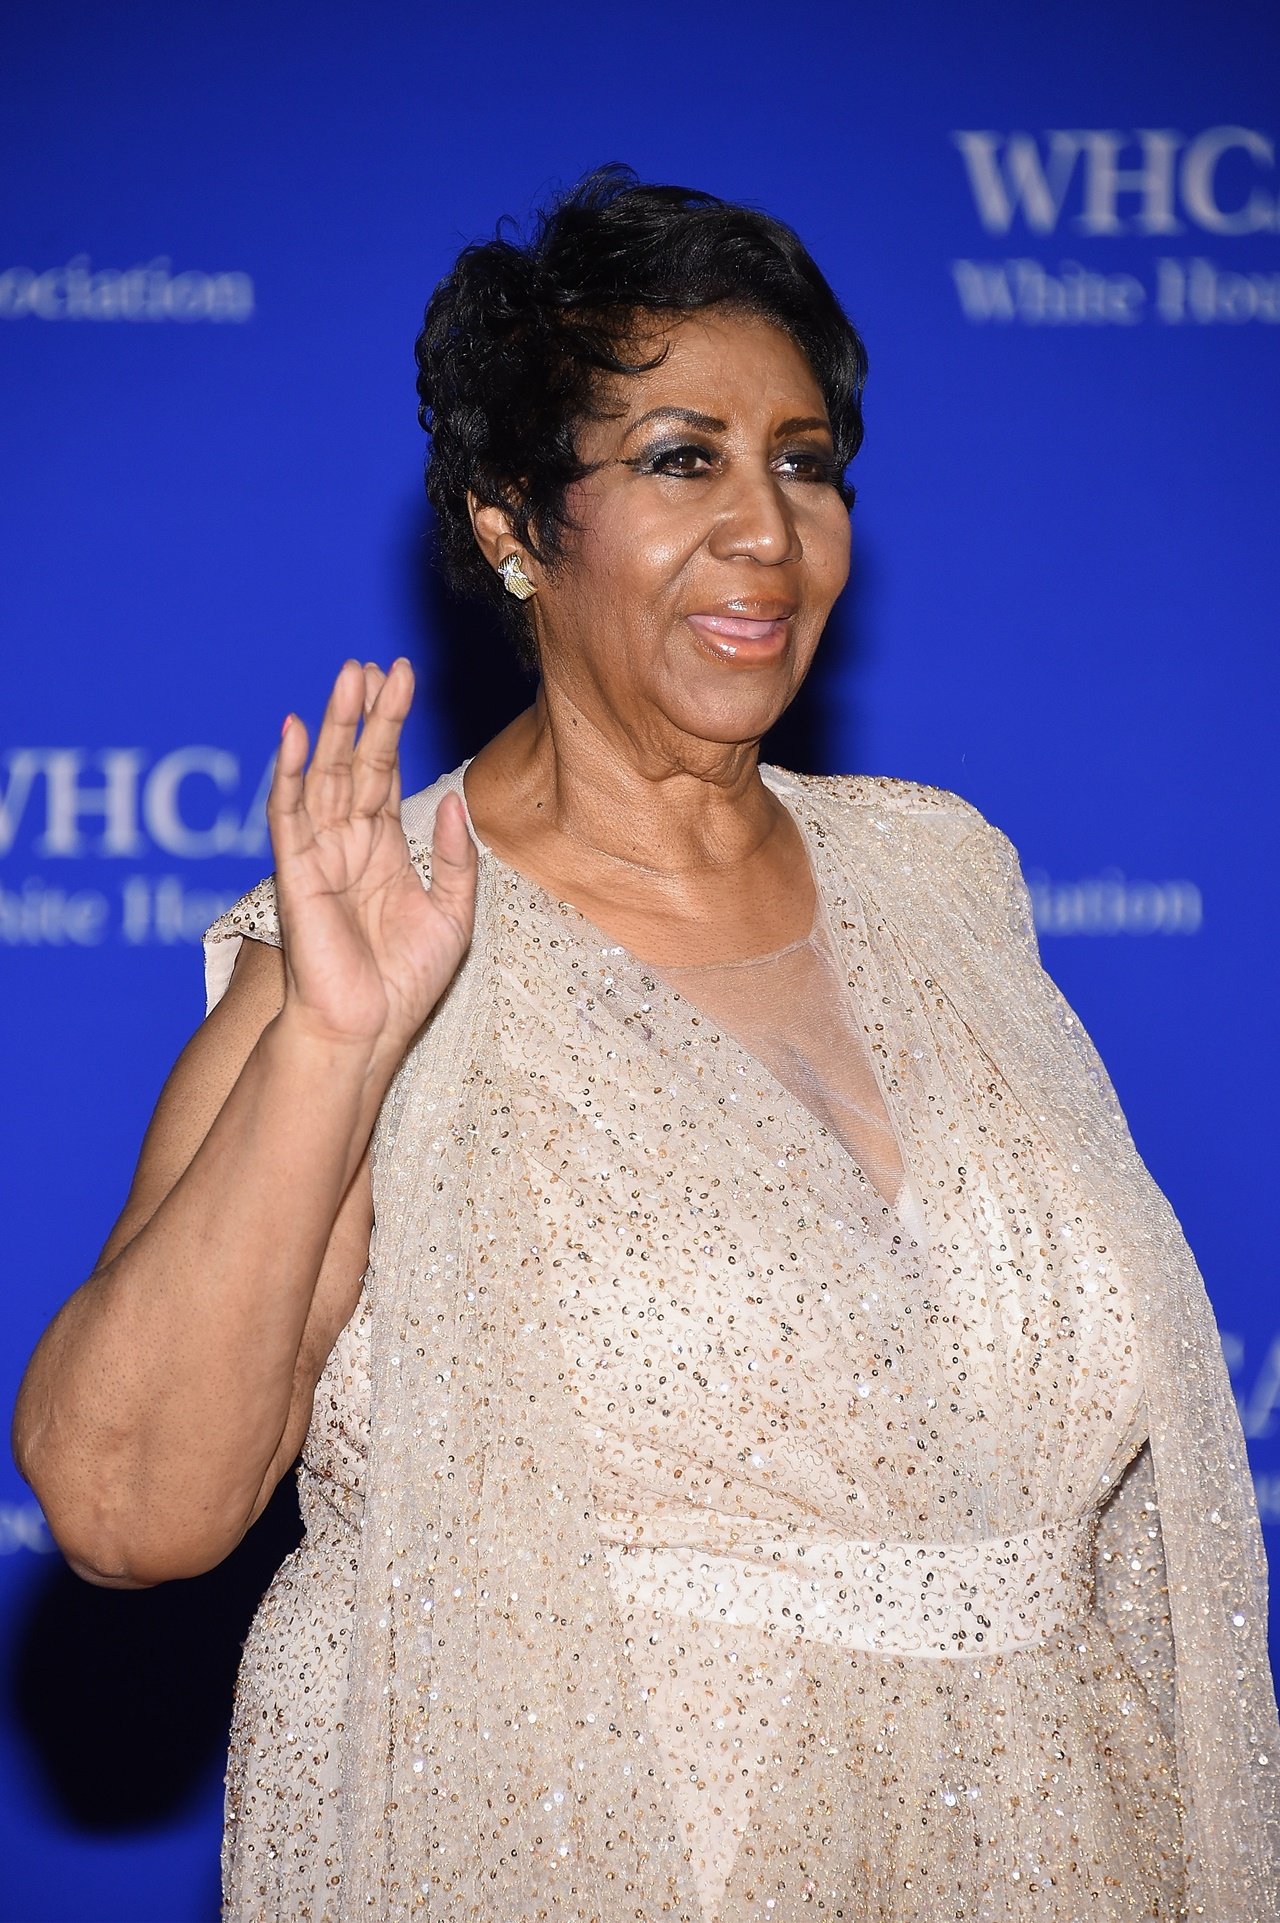 Jones photographed stars including Aretha Franklin, shown here in a photo by Larry Busacca/Getty Images.